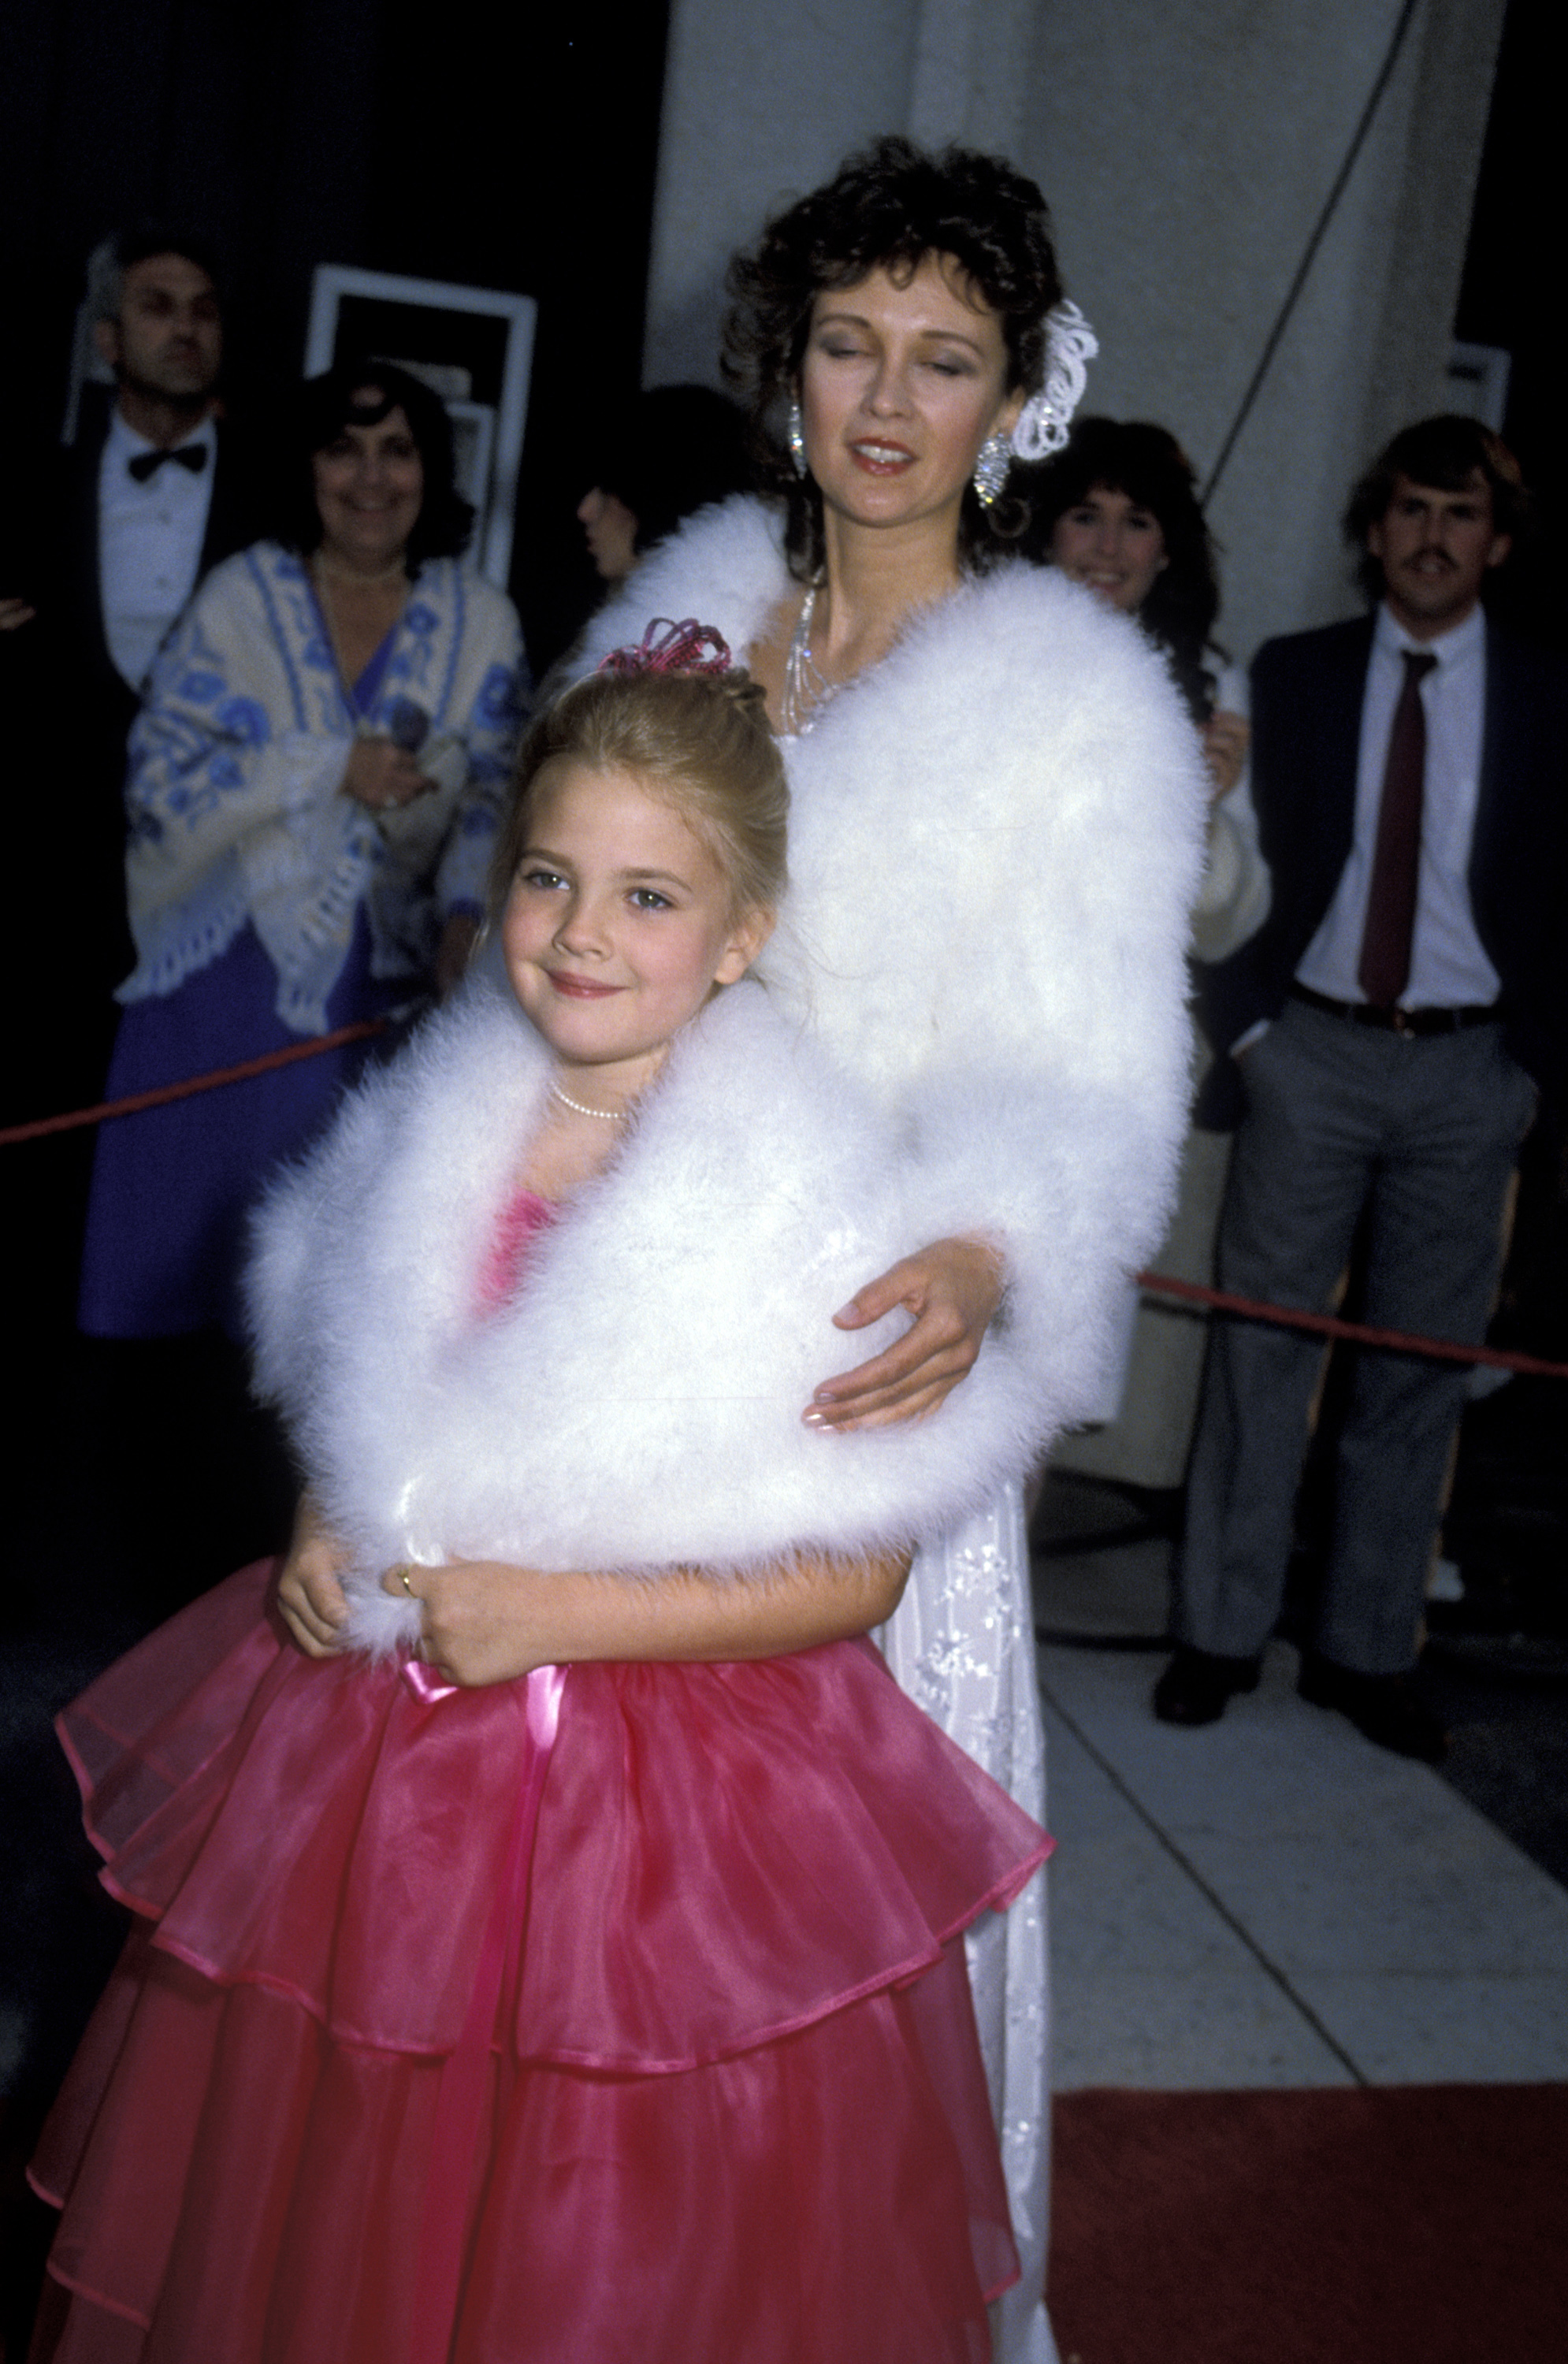 Drew Barrymore and Jaid Barrymore in Los Angeles, California, on April 11, 1983. | Source: Getty Images